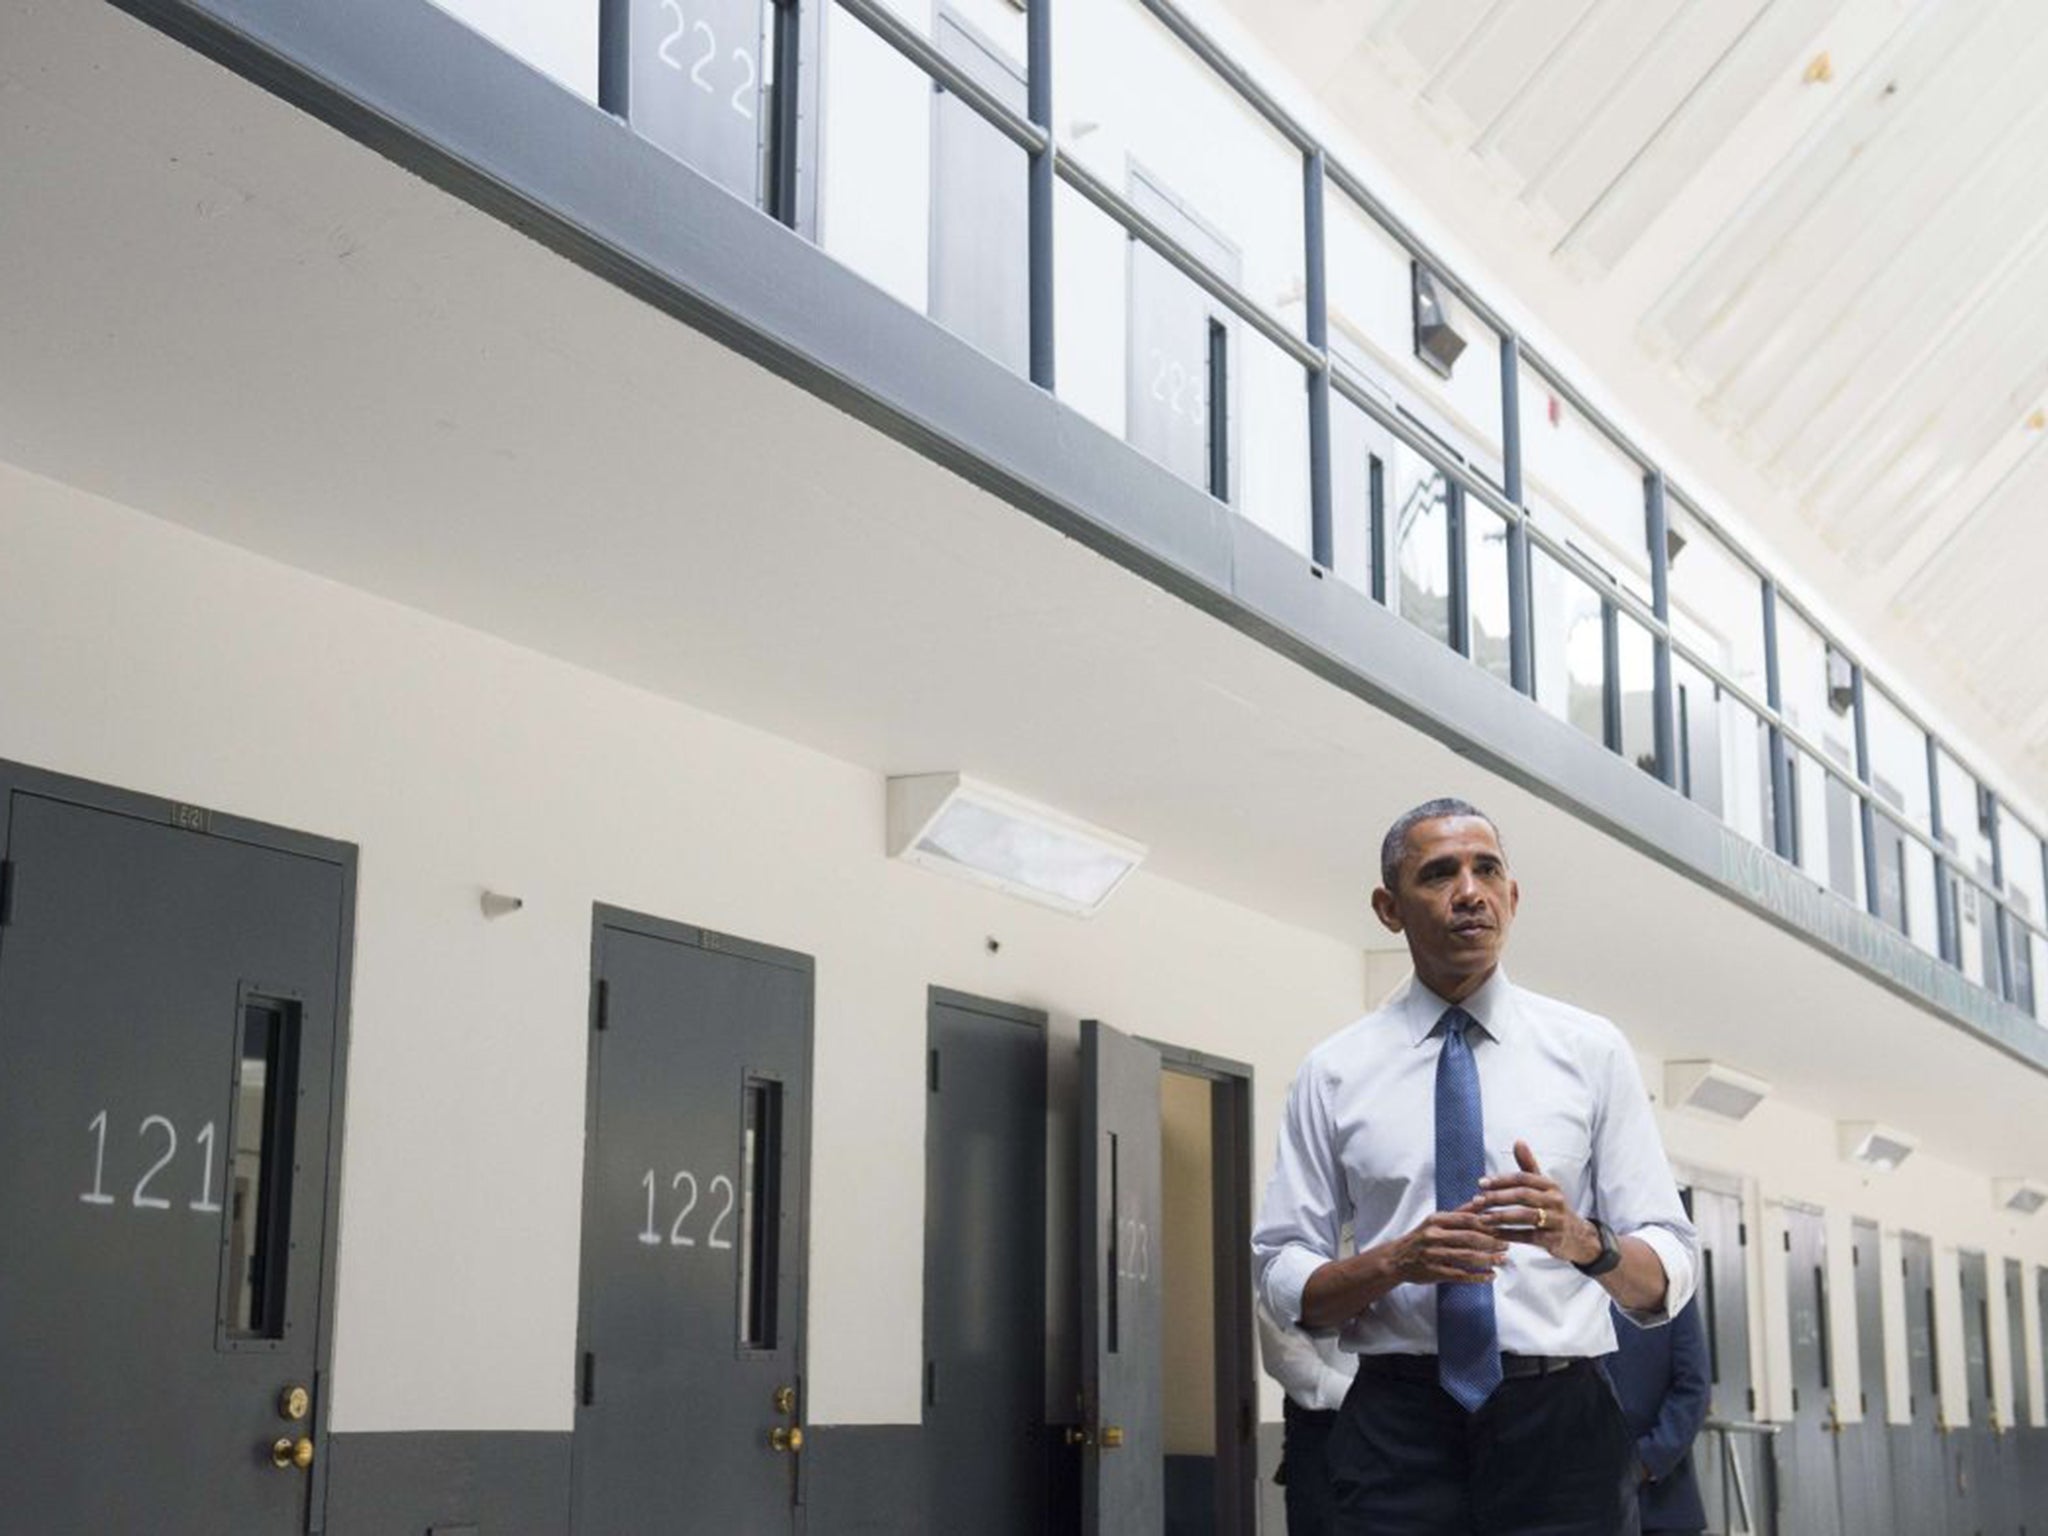 Barack Obama’s visit to El Reno prison last Thursday marked his determination to leave a lasting legacy in his final months as president